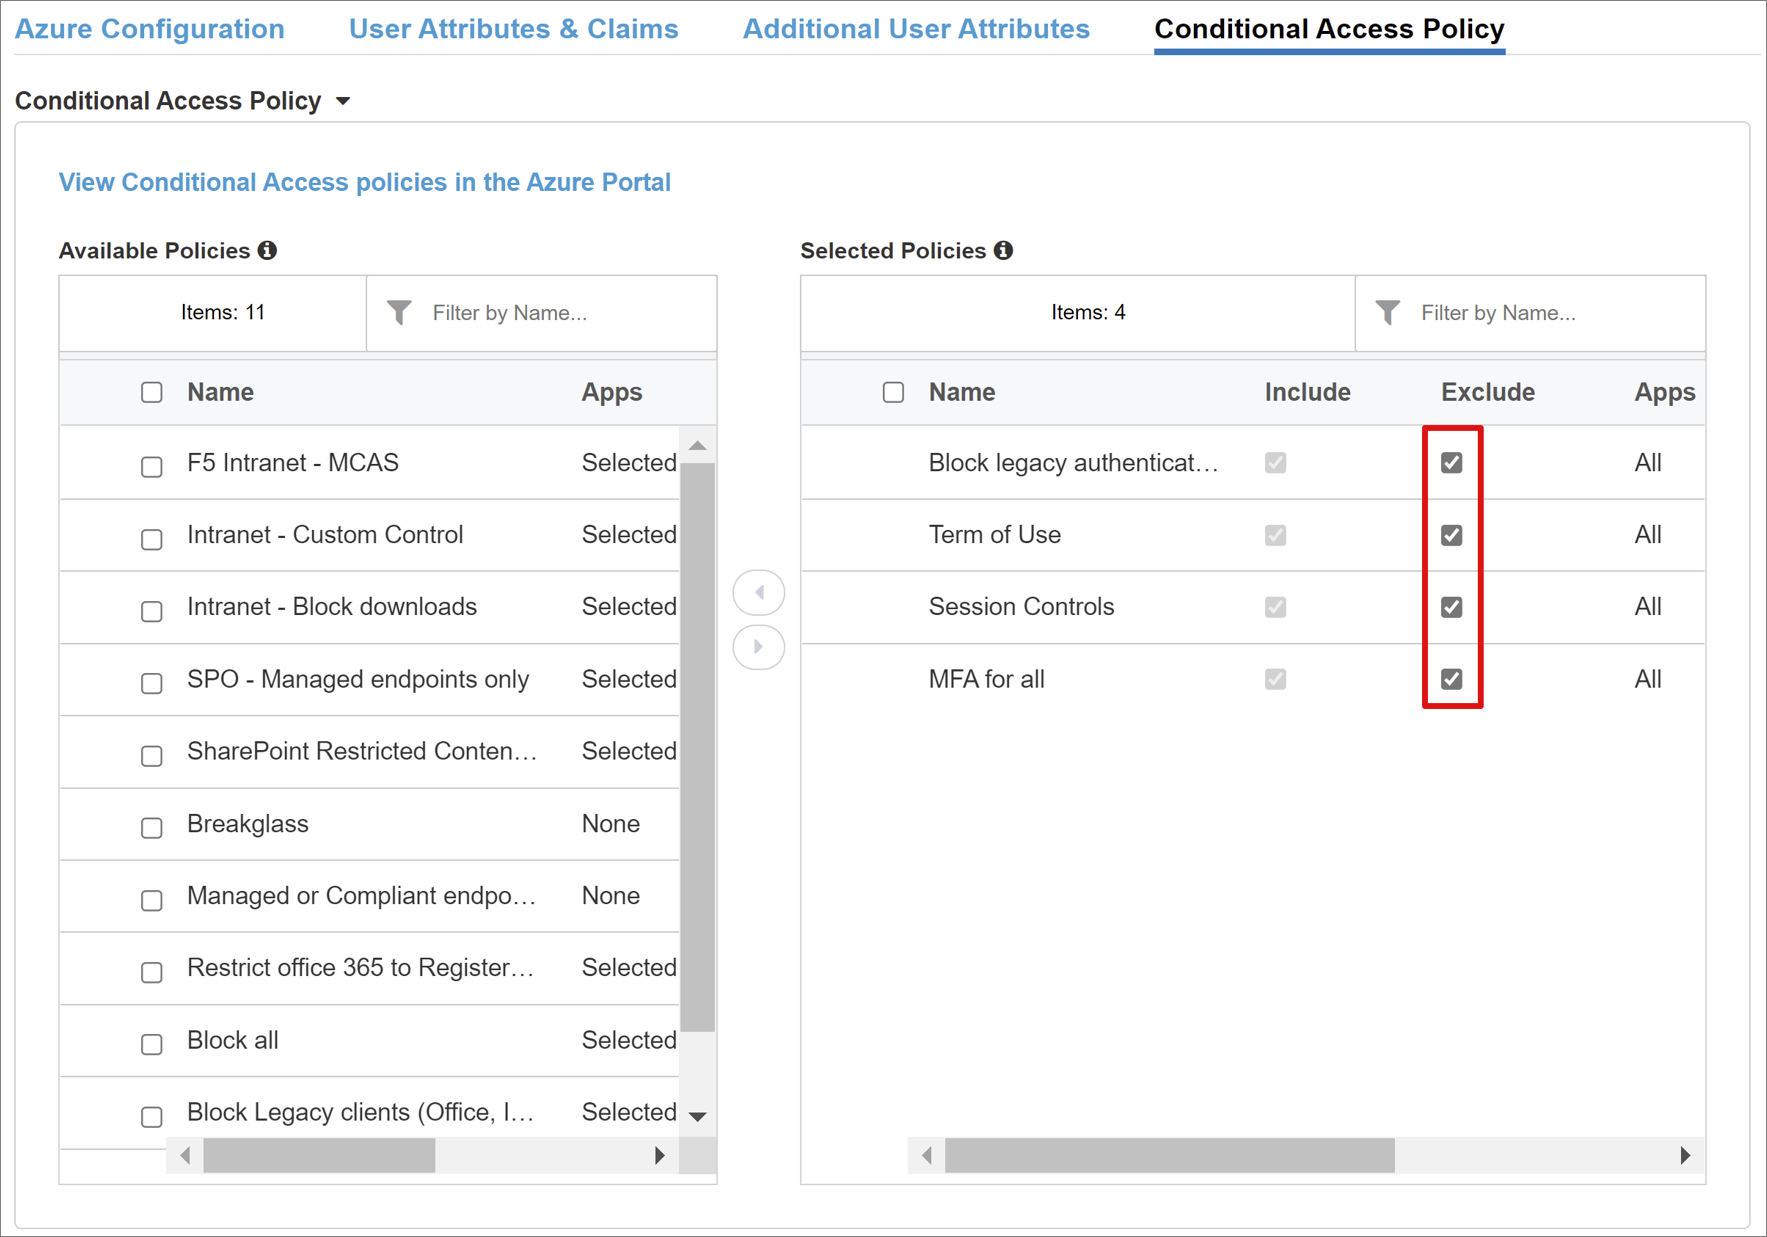 Screenshot of the Exclude option selected for policies in Selected Polices.